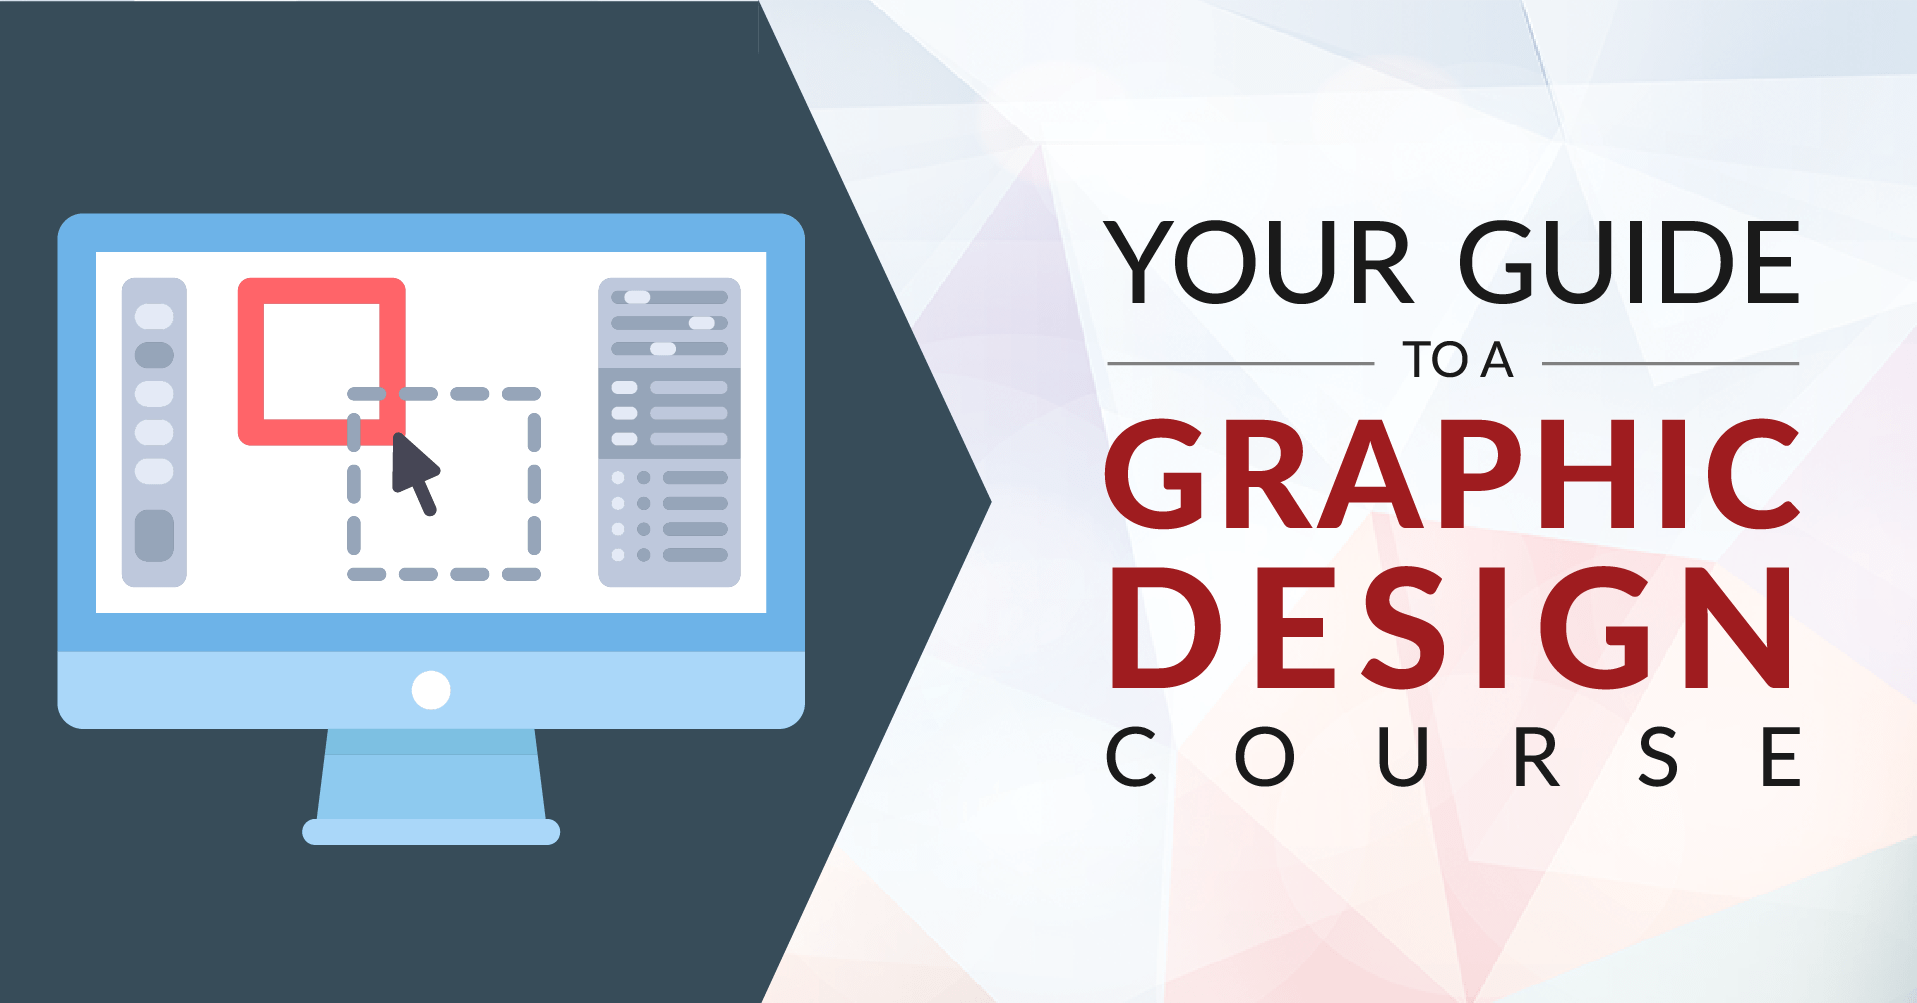 10 Best Graphic Design Tutorials For Beginners 2021 Learn Graphic